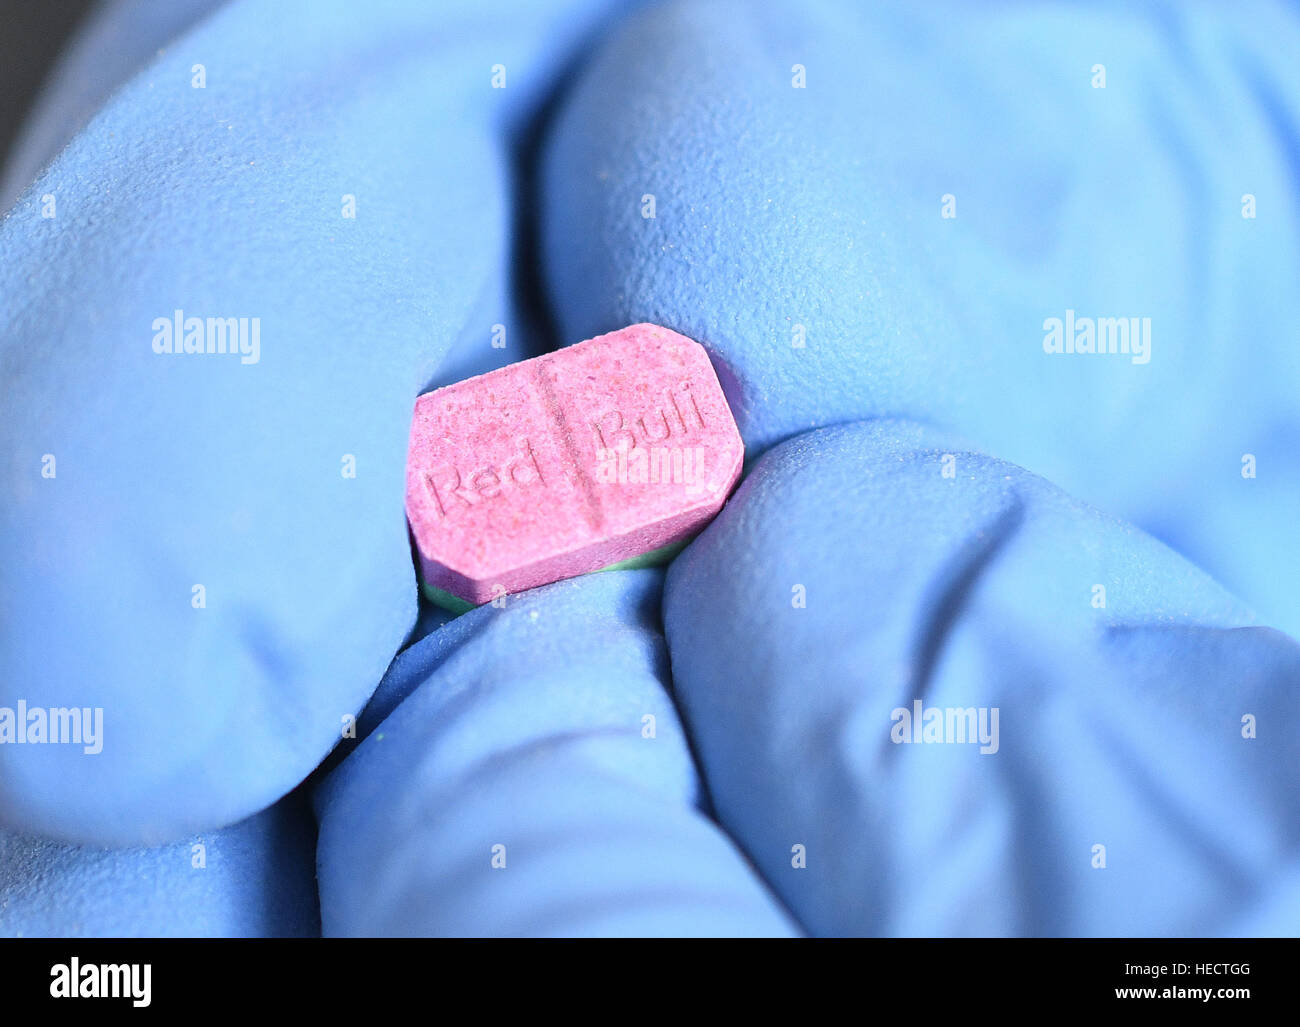 Cologne, Germany. 20th Dec, 2016. A customs officer presents an ecstasy pill at a press conference in Cologne, Germany, 20 December 2016. After several discoveries of large amounds of ecstasy between July and September, German customs presented the seized drugs Photo: Henning Kaiser/dpa/Alamy Live News Stock Photo